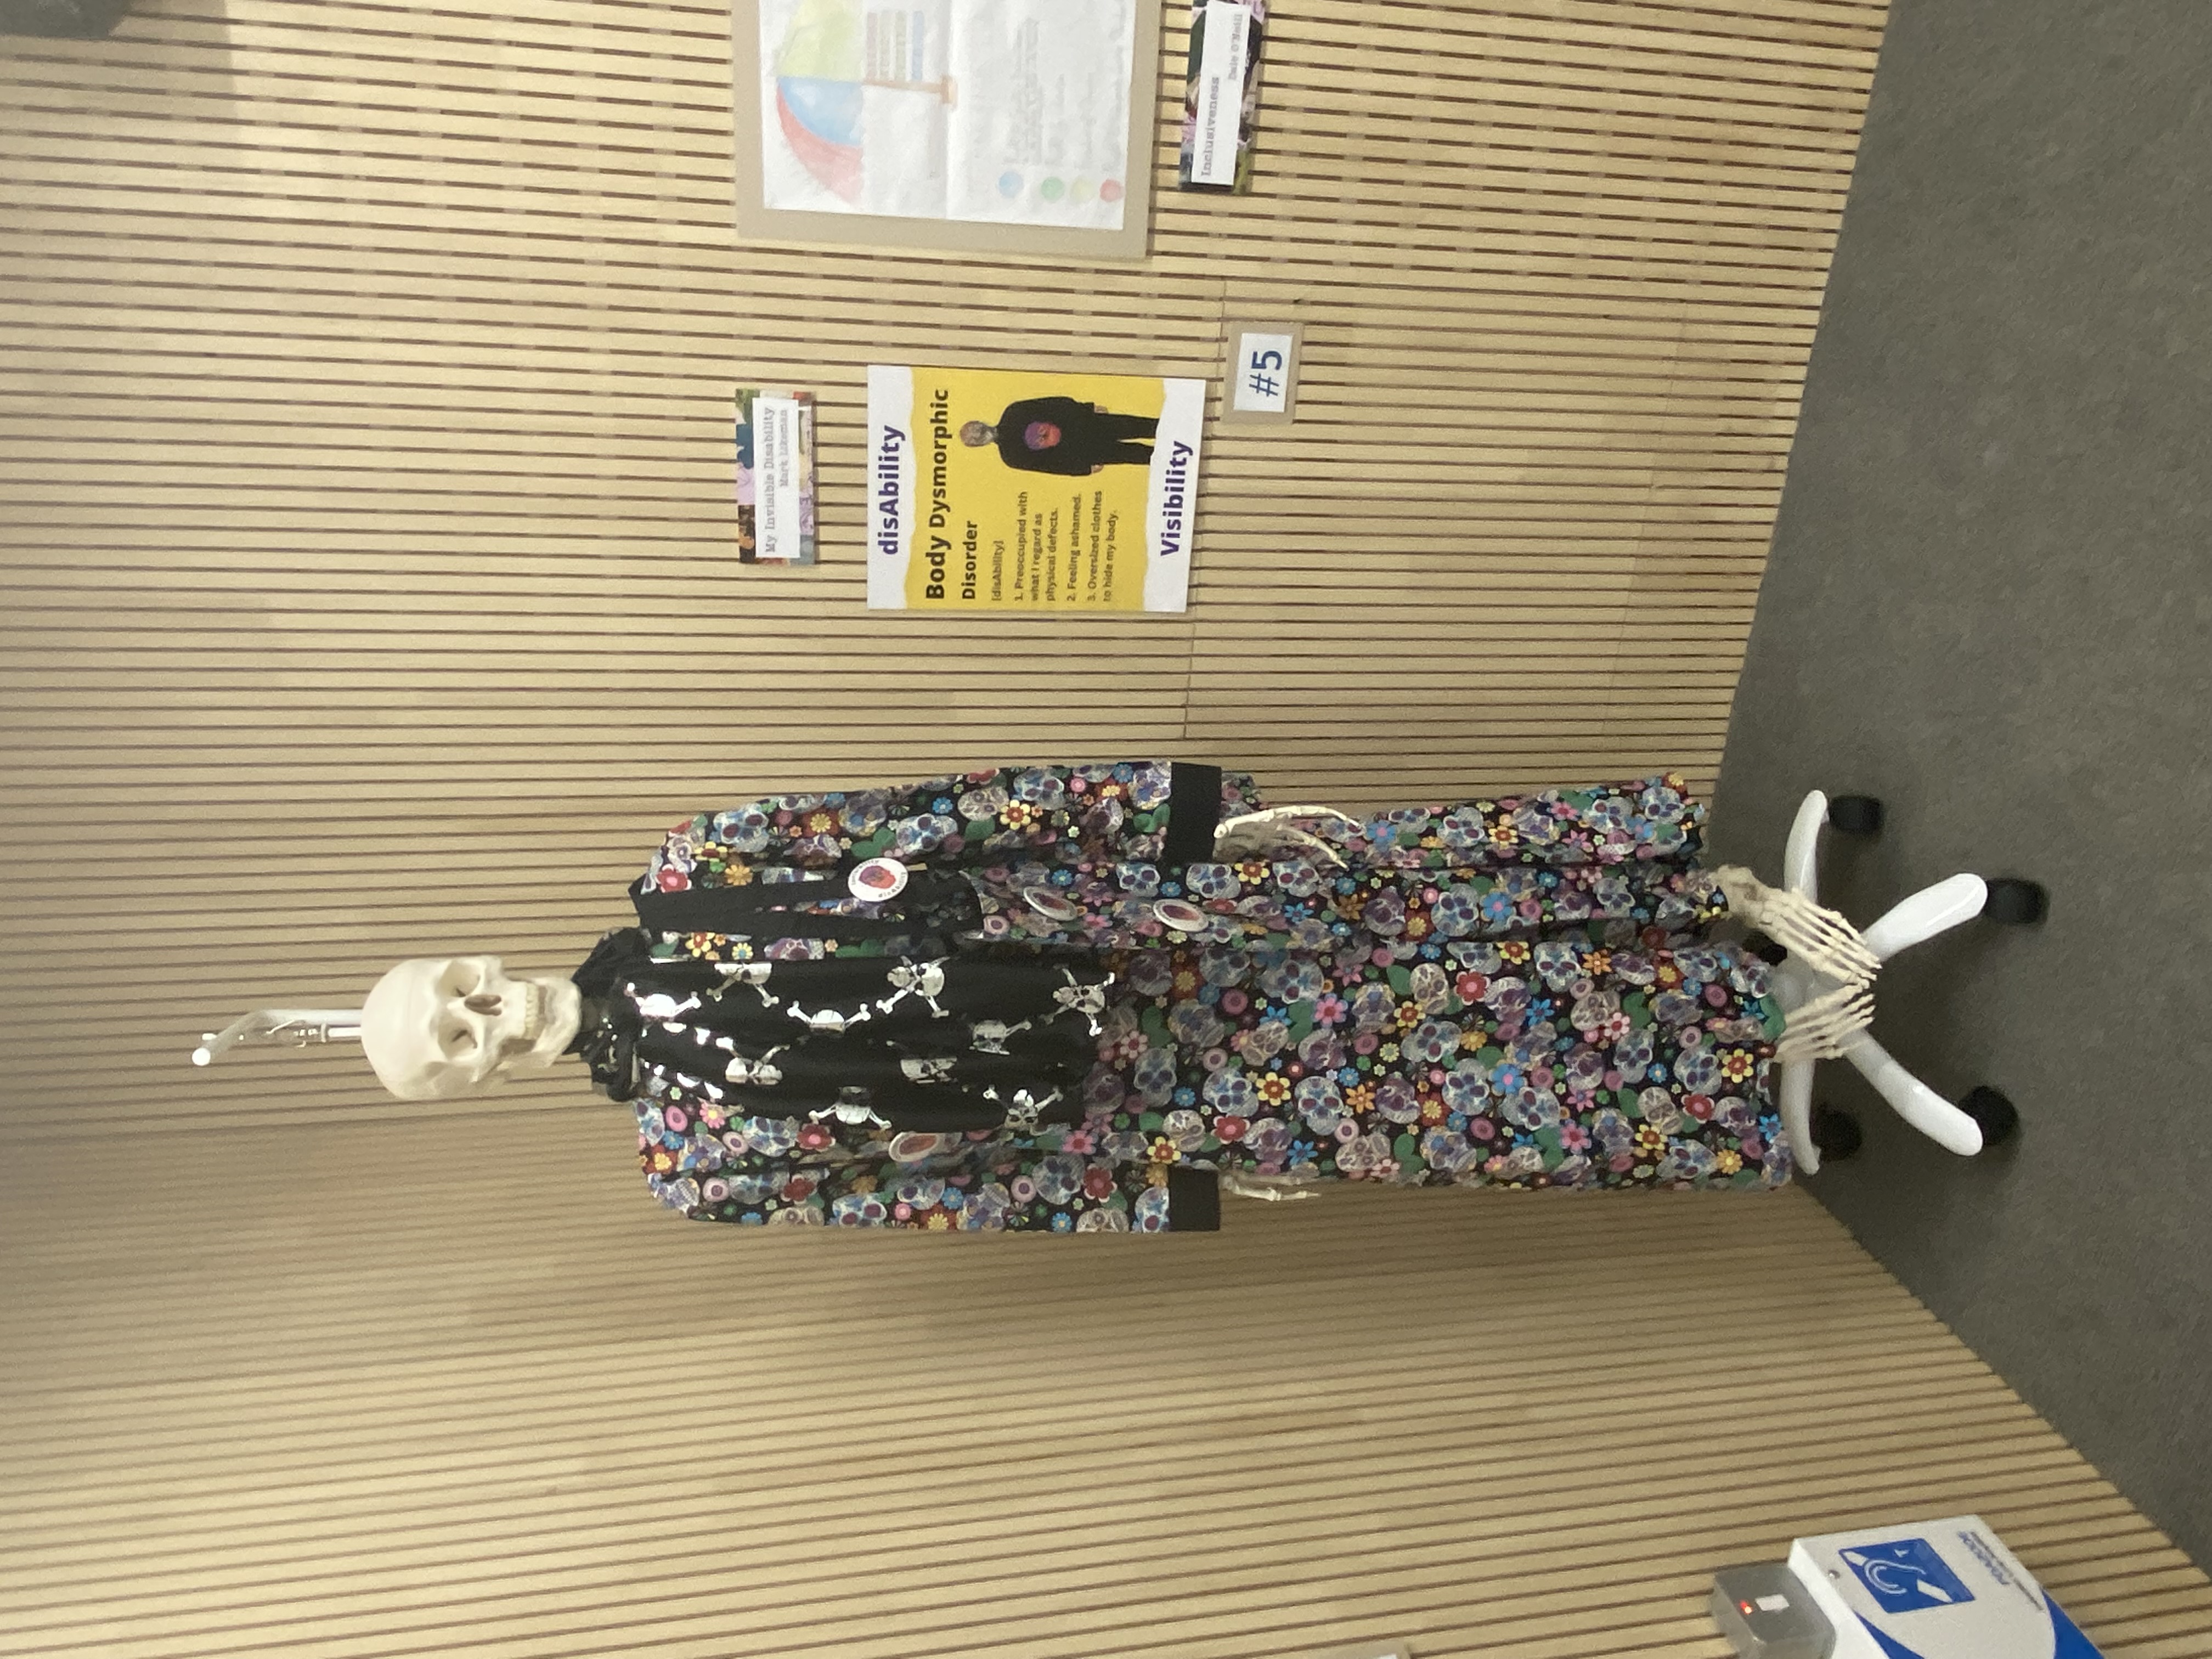 In this photo there is a human non-gender skeleton hanging on a stand with wheels. The skeleton is draped with a full-length dress, with a pattern of different coloured flowers and skulls. The are strips of black fabric (bias) on the neckline and cuffs of the dress. Around the neck of the skeleton is a long black scarf with silver skull and crossbones. There is a tote bag around the left shoulder of the skeleton, made of the same fabric as the dress. There are a number of badges or pins on the skeleton and tote bag that reads 'Invisibility disAbility', with a image of a skull adorned with different coloured flowers. The inspiration for the dress comes from The Day of the Dead (Día de Muertos or Día de los Muertos) a holiday traditionally celebrated on November 1 and 2, and widely observed in Mexico. The dress is made from 100% cotton twill fabric. To the right of the skeleton there is a poster the reads 'disAbility Invisibility'. Body Dysmorphic Disorder. Below this are the words; 1. Preoccupied with what I regard as physical defects. 2. Feeling ashamed. 3. Oversized clothes to hide my body. There is also an image of a male figure with face covered and wearing a boiler suit, with a skull on the front.